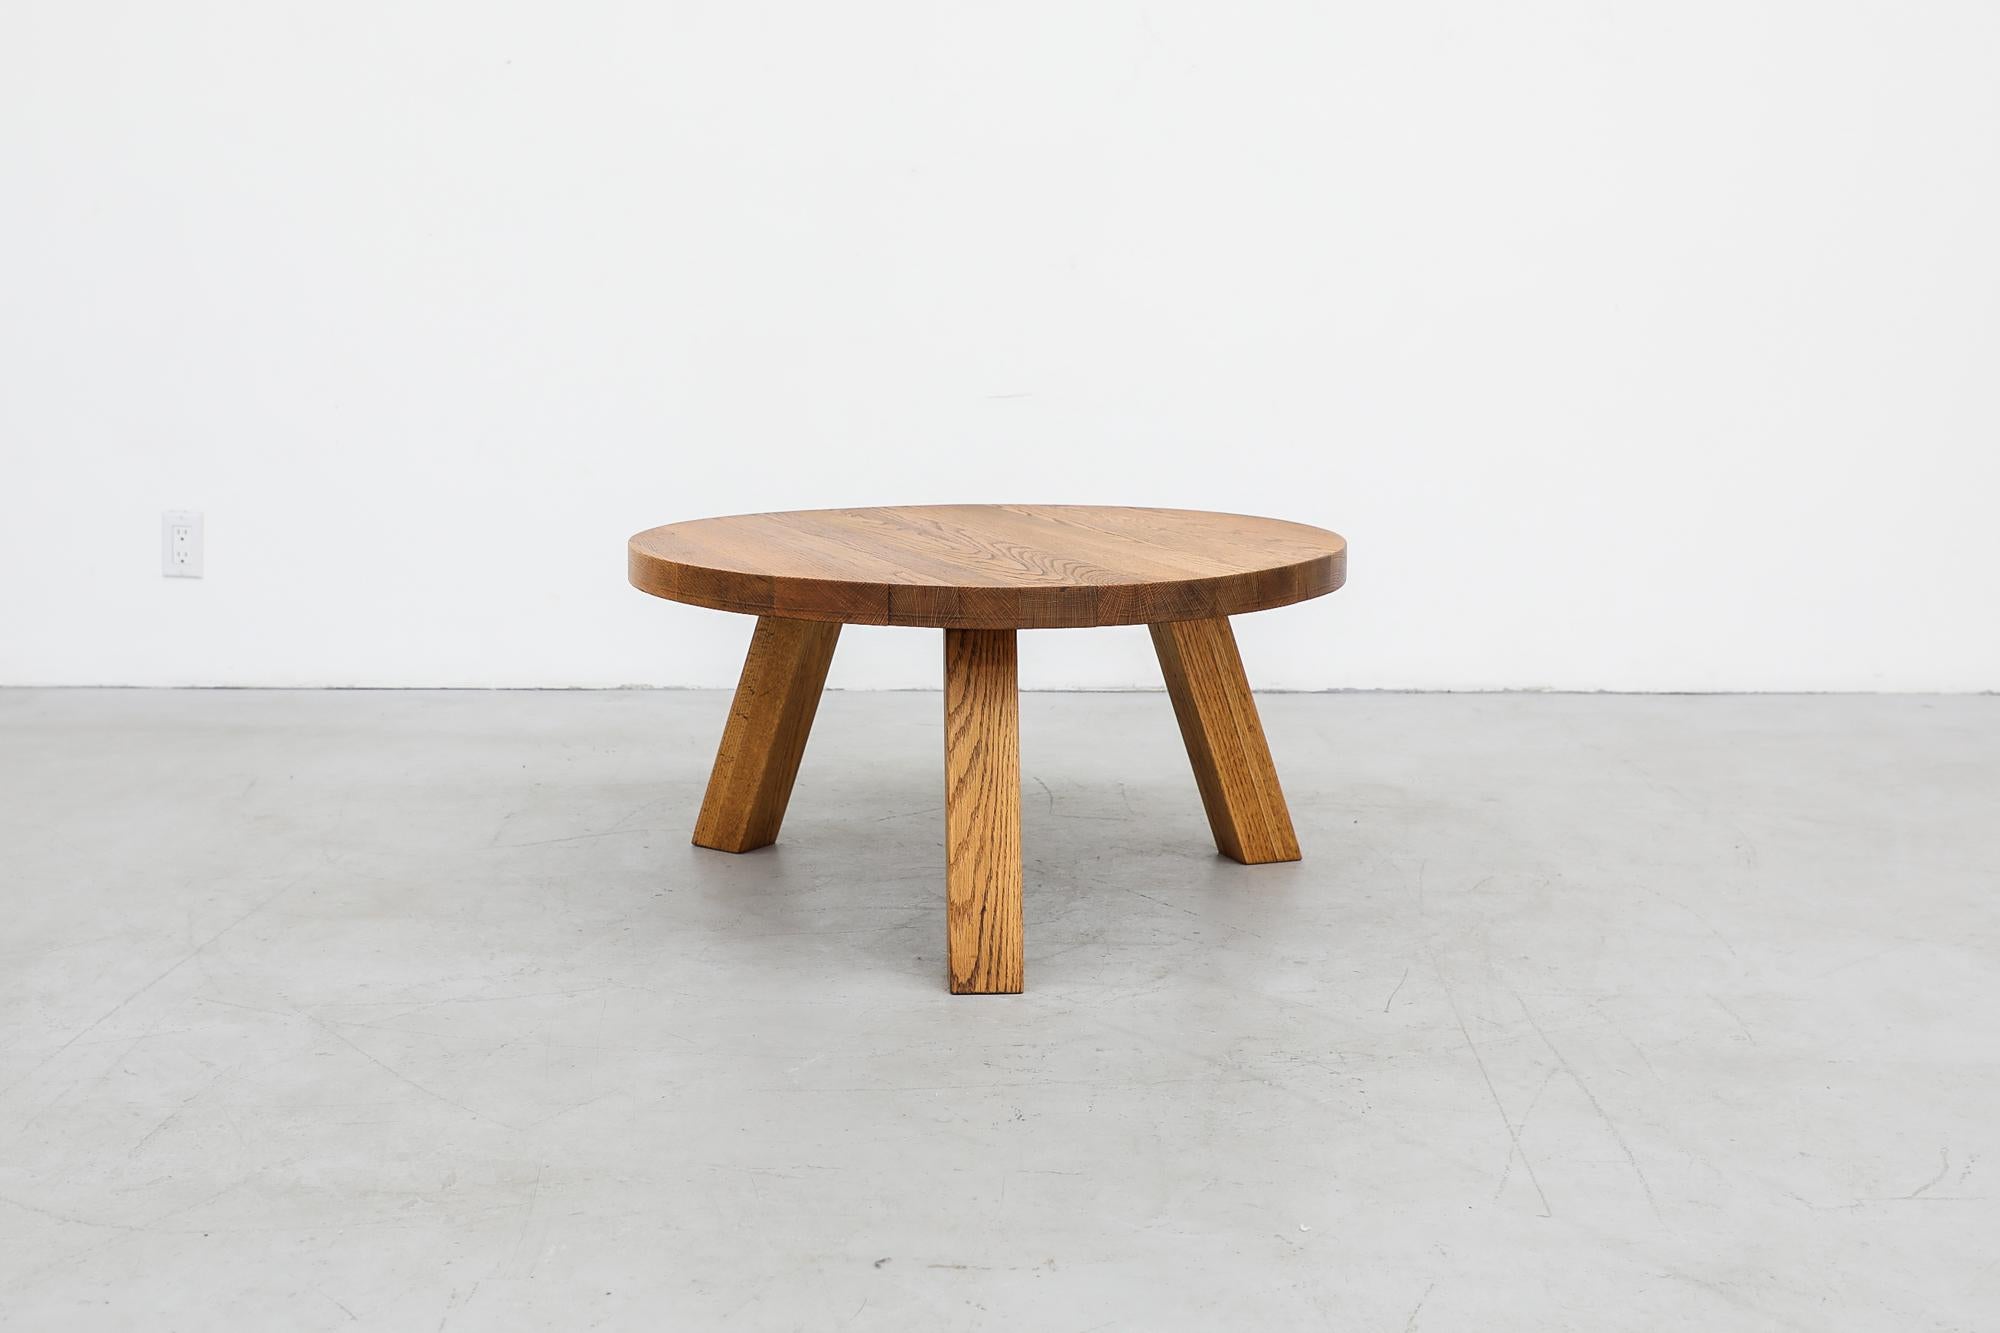 This 1970s, Brutalist, heavy, round coffee table is made from solid oak and has three sturdy square tripod legs. The piece is lightly refinished. In otherwise original condition with visible wear and patina consistent with its age and use. Other